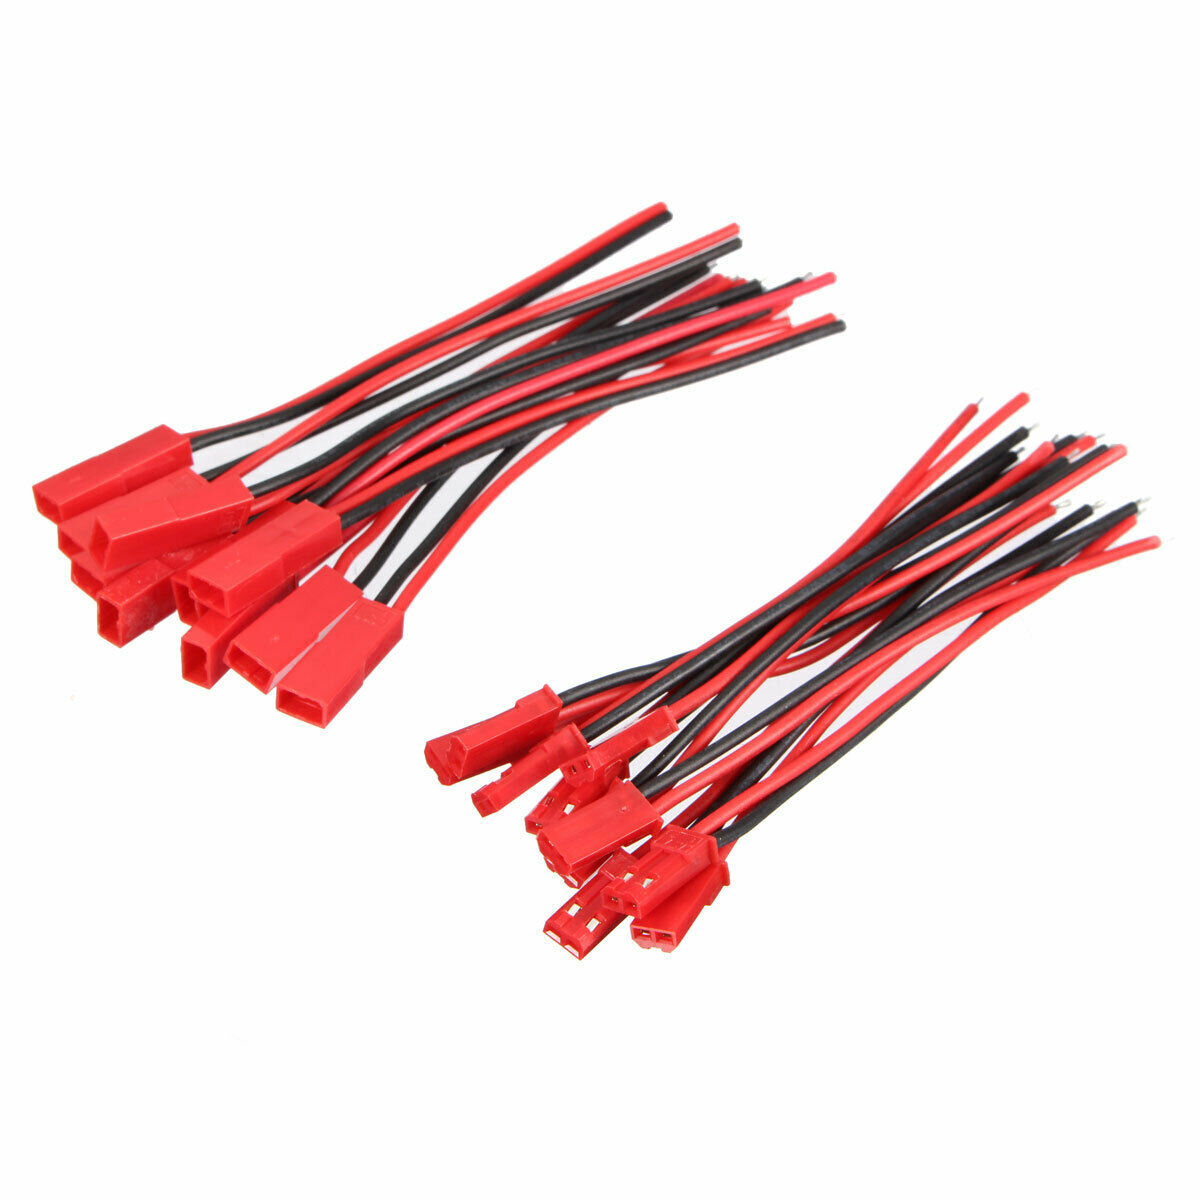 JST Male & Female Connectors Plug Cable Wire Line 2 Pins 110mm Red 10 Pairs